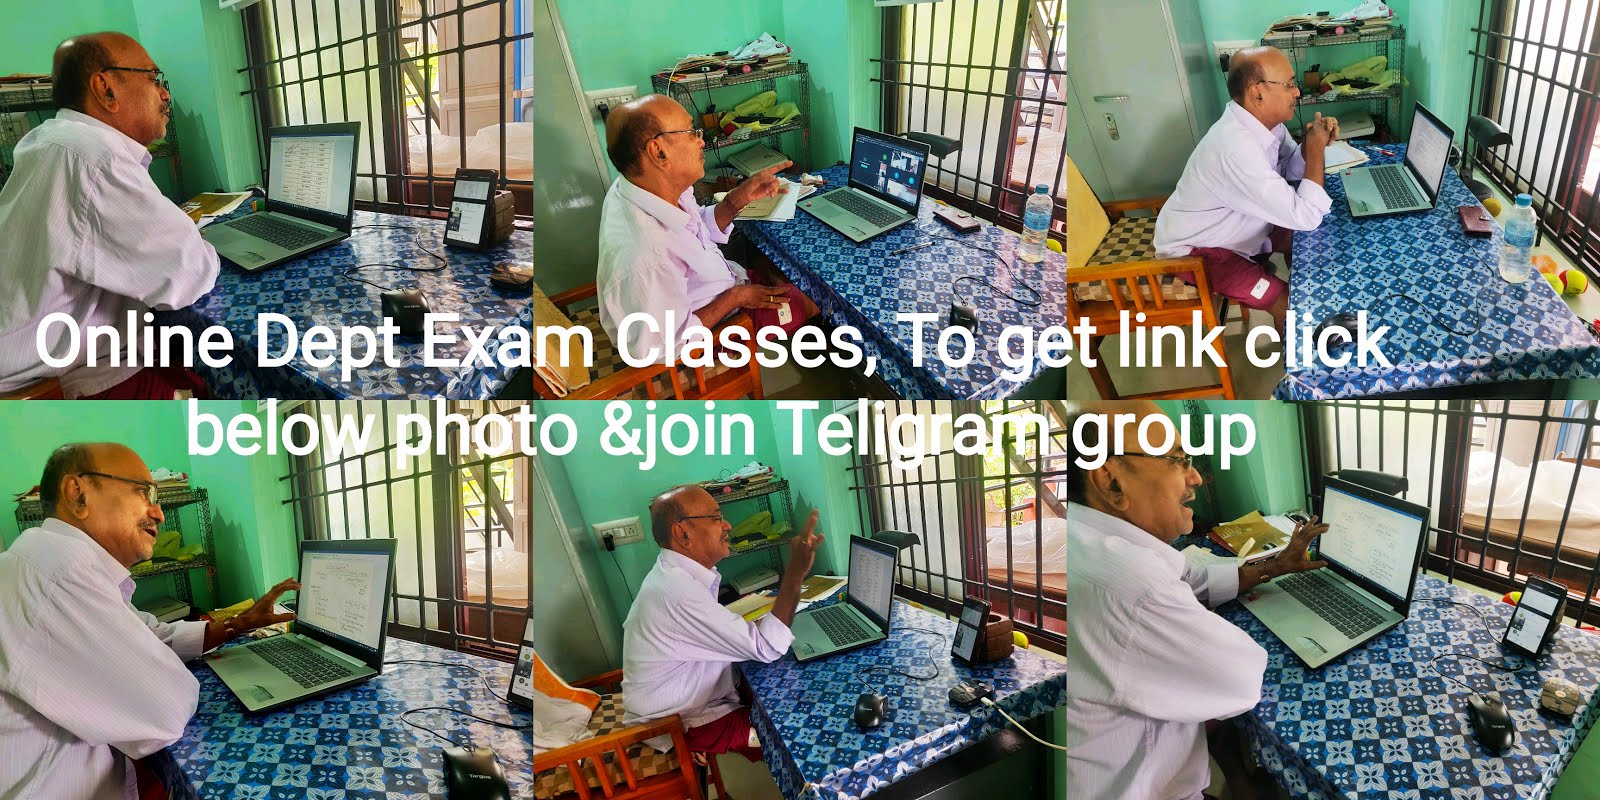 Join Teligram group to get online Dept Exam Classes link. CLICK ABOVE IMAGE/ PHOTO